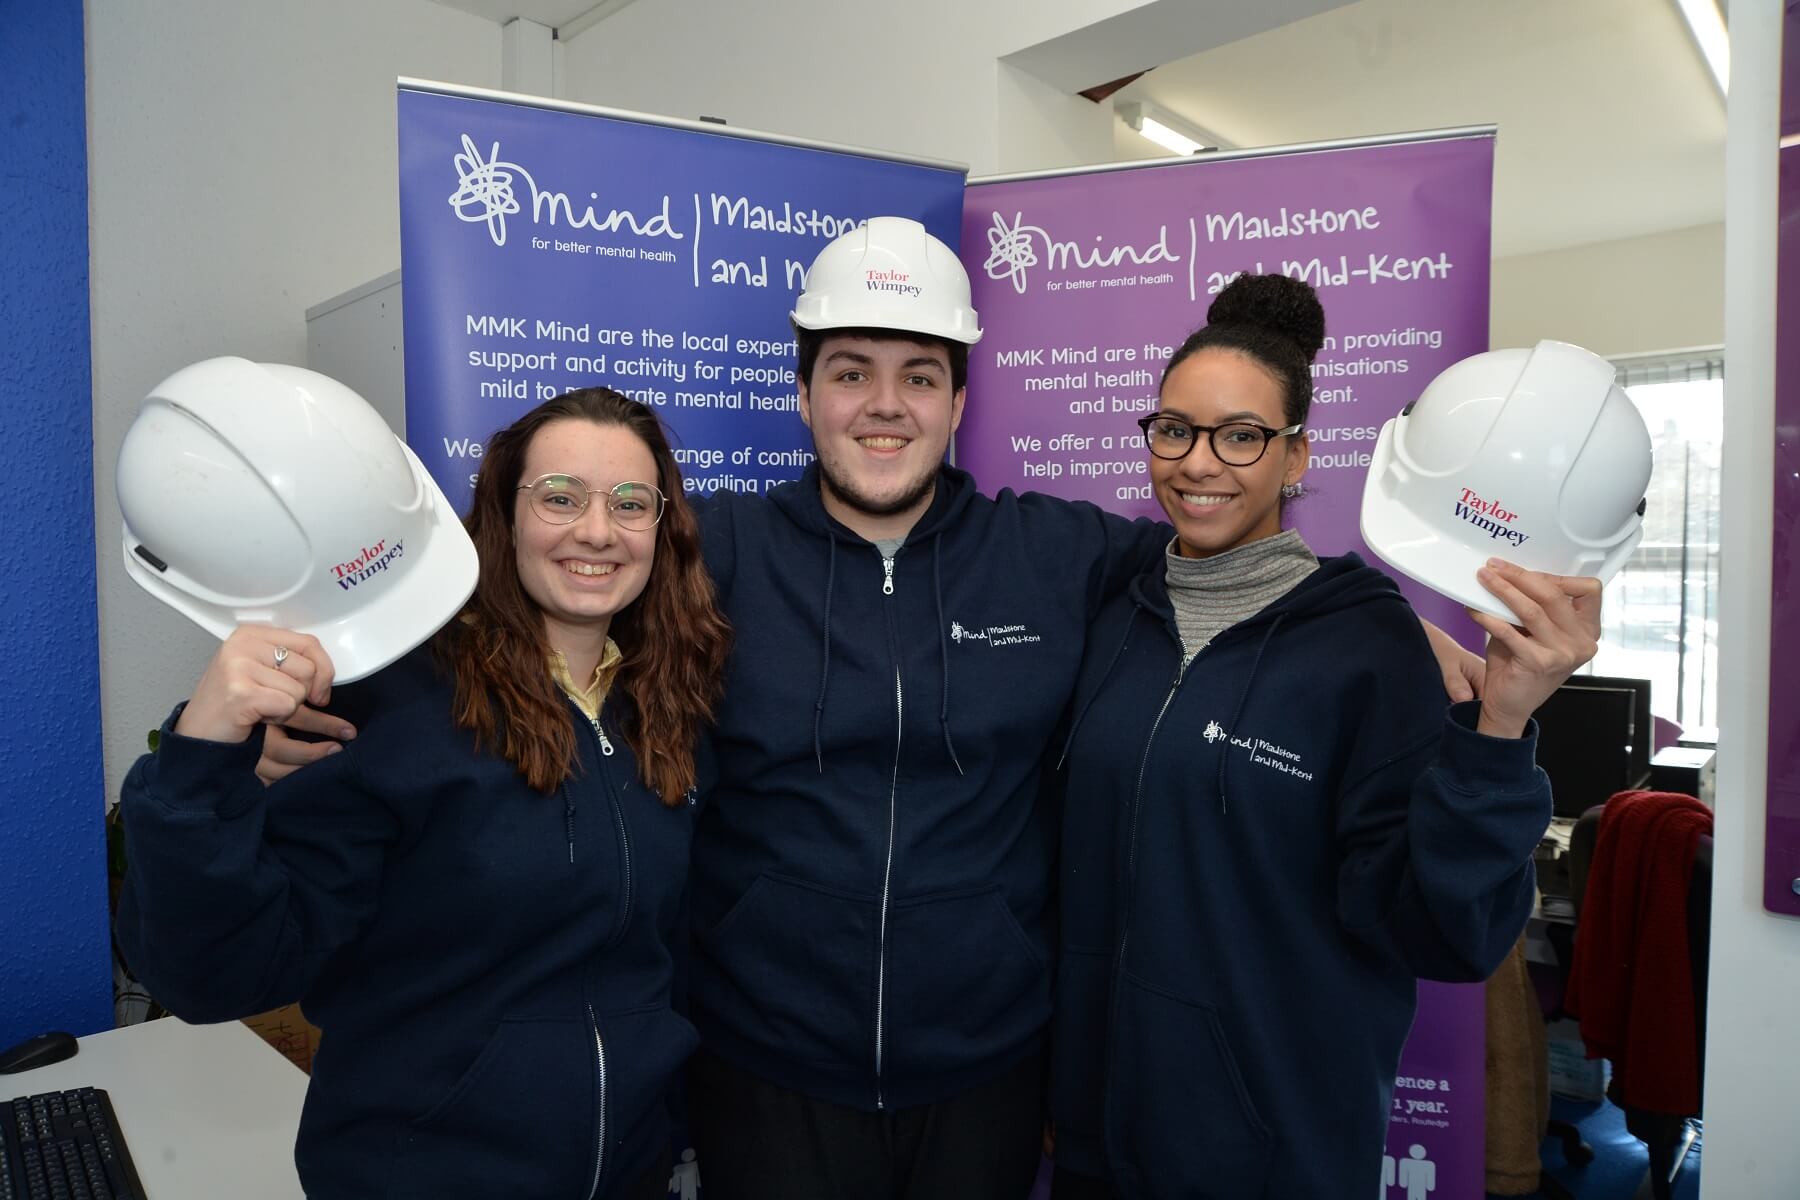 Maidstone and Mid-Kent Mind charity